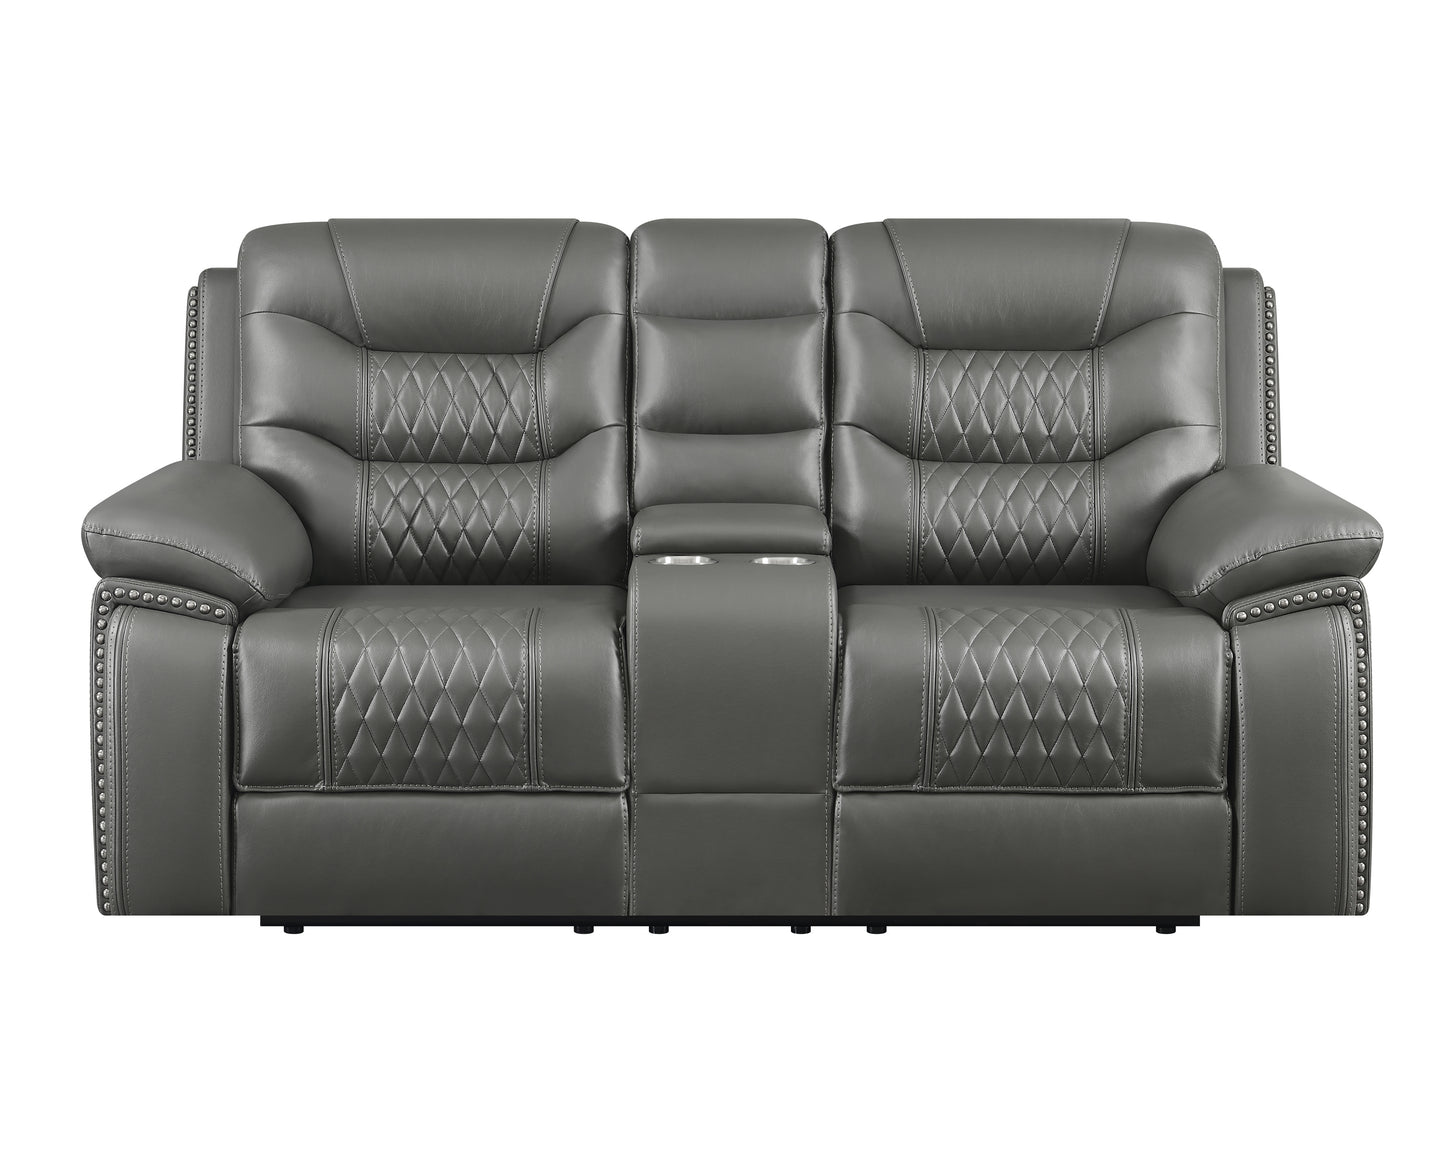 Flamenco Tufted Upholstered Motion Loveseat with Console Charcoal